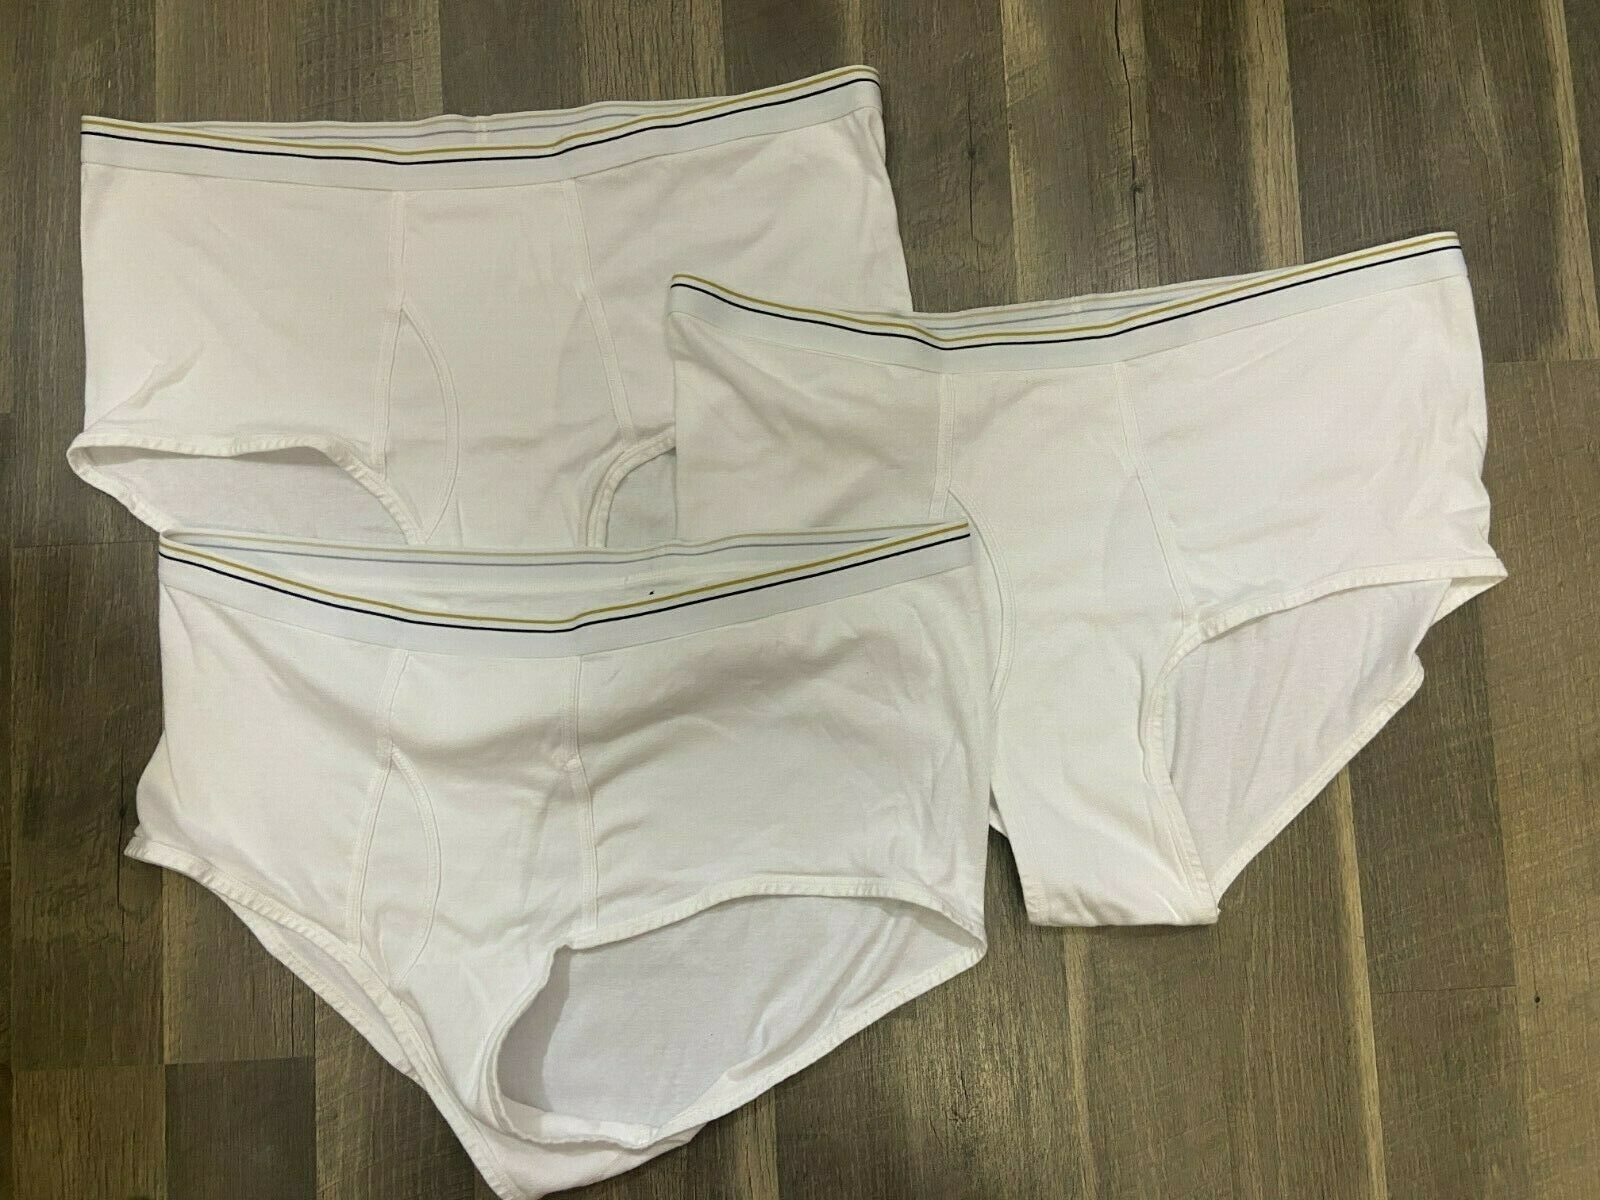 Stafford Men's Classic White Brief Size 52 and 50 similar items